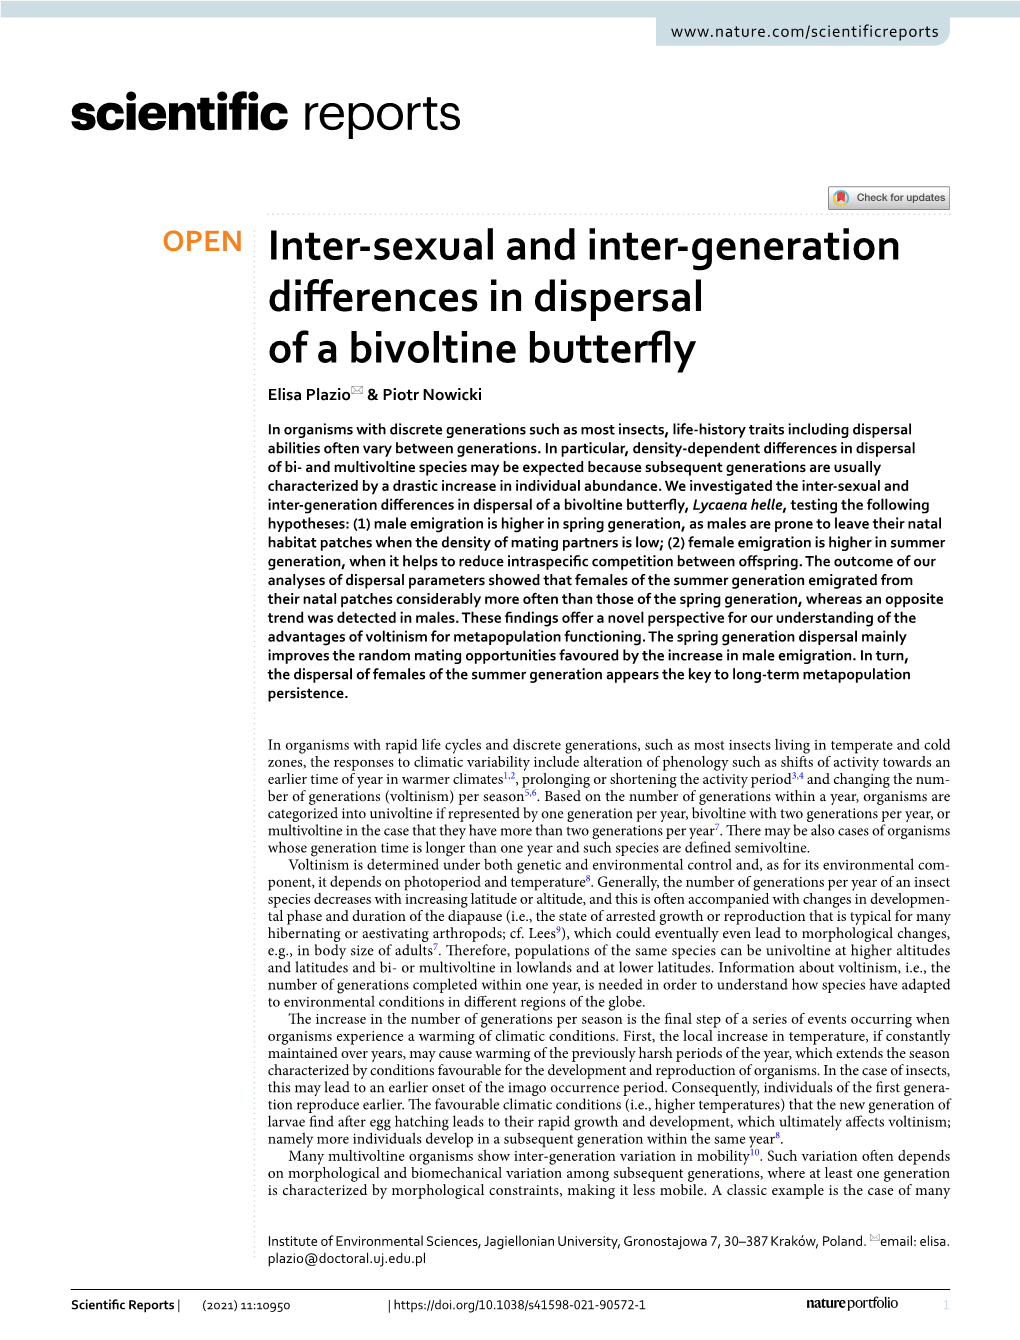 Inter-Sexual and Inter-Generation Differences in Dispersal of A